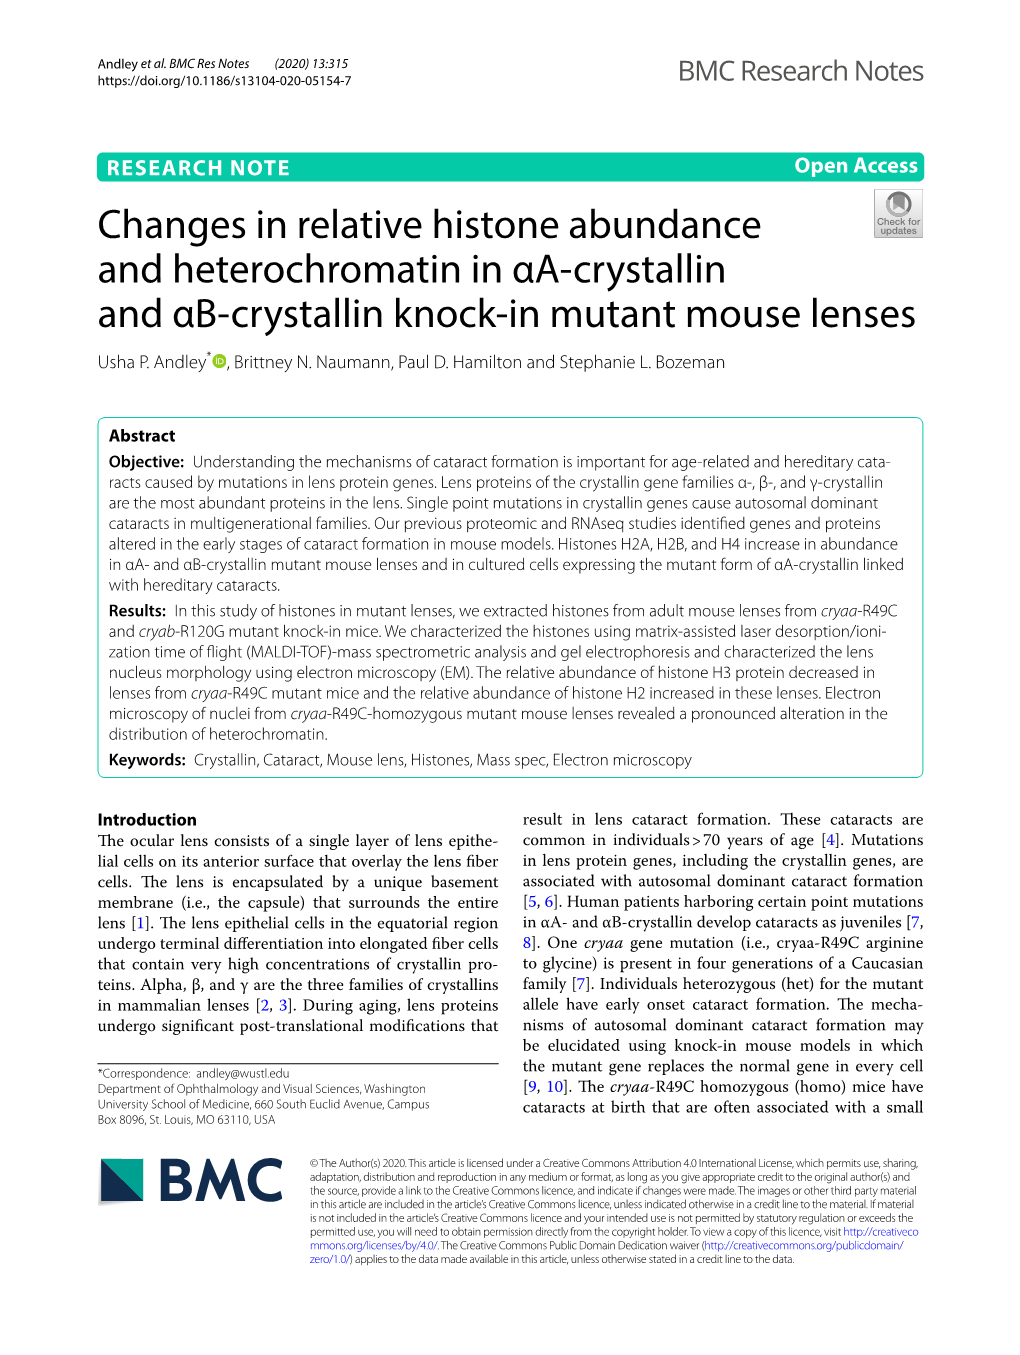 Changes in Relative Histone Abundance and Heterochromatin in Αa‑Crystallin and Αb‑Crystallin Knock‑In Mutant Mouse Lenses Usha P